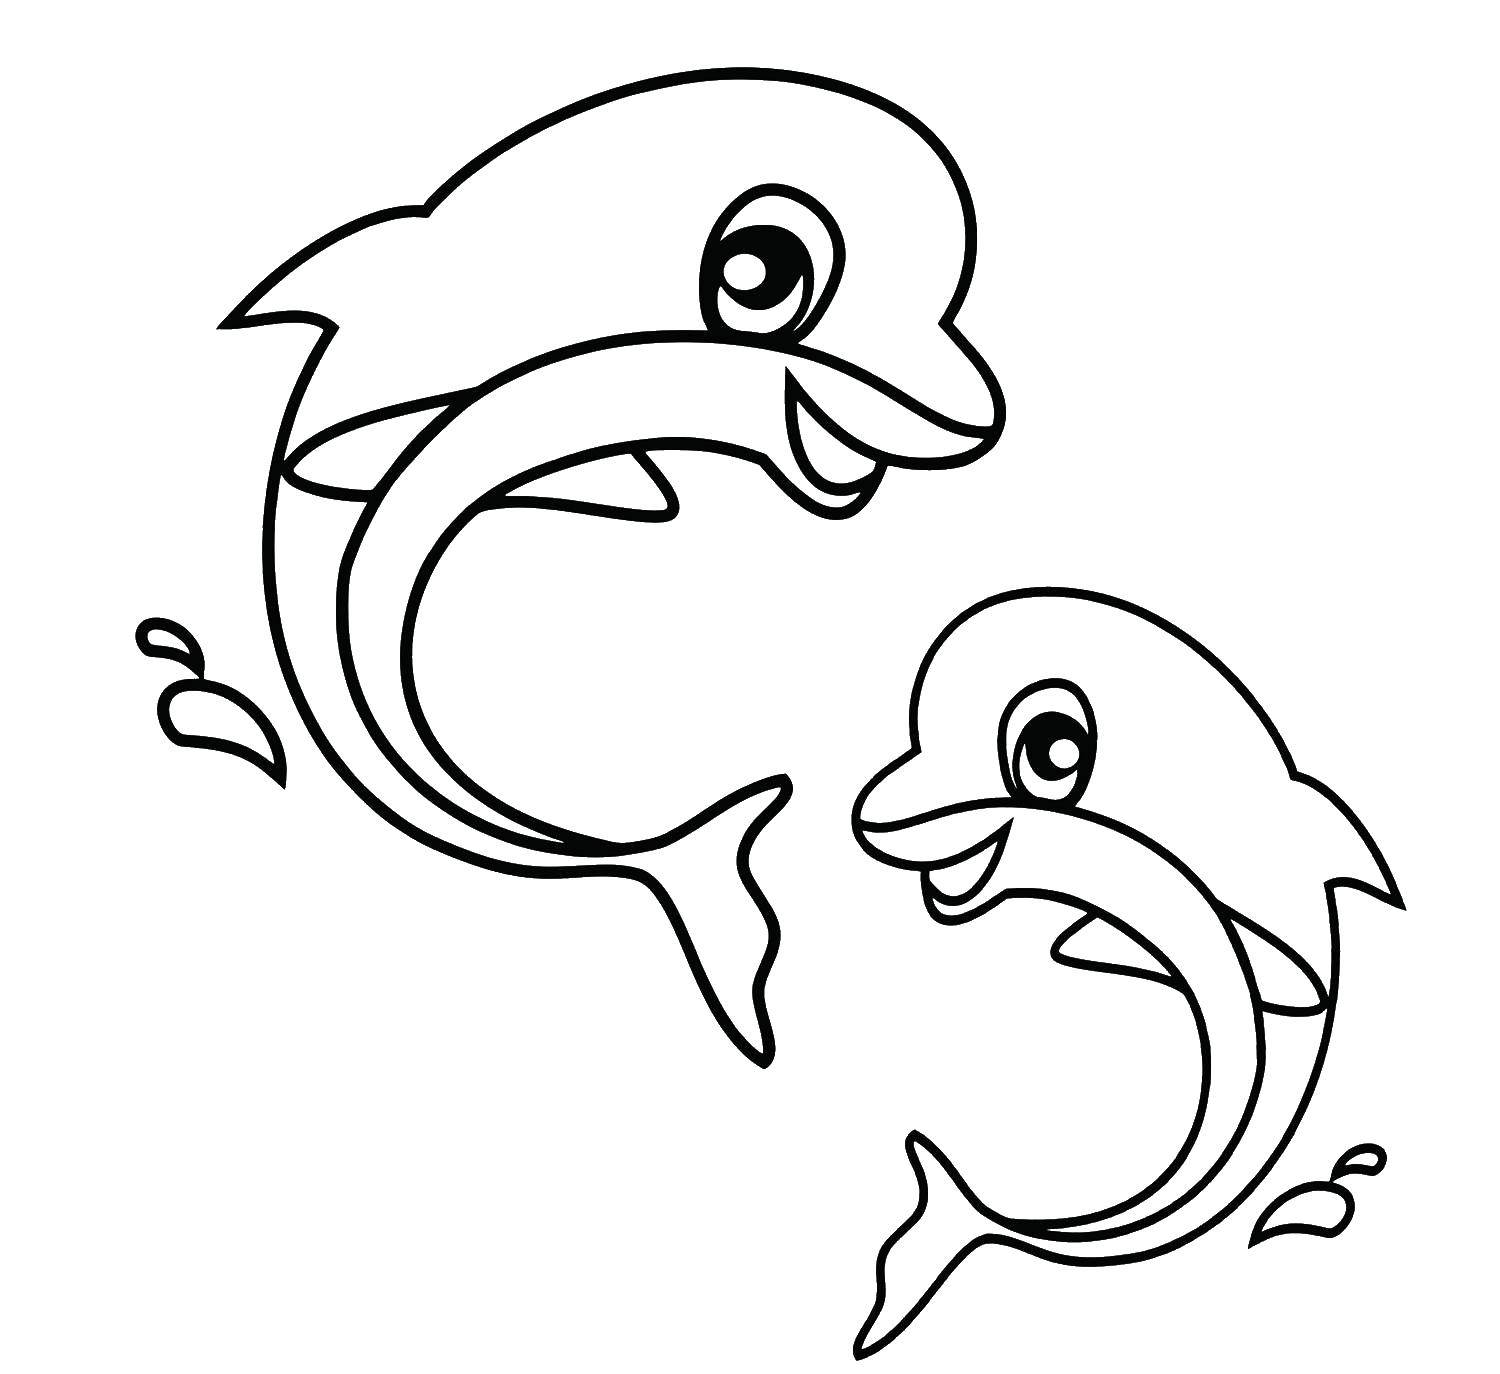 Coloring Two dolphins. Category marine animals. Tags:  Dolphin, mammals.